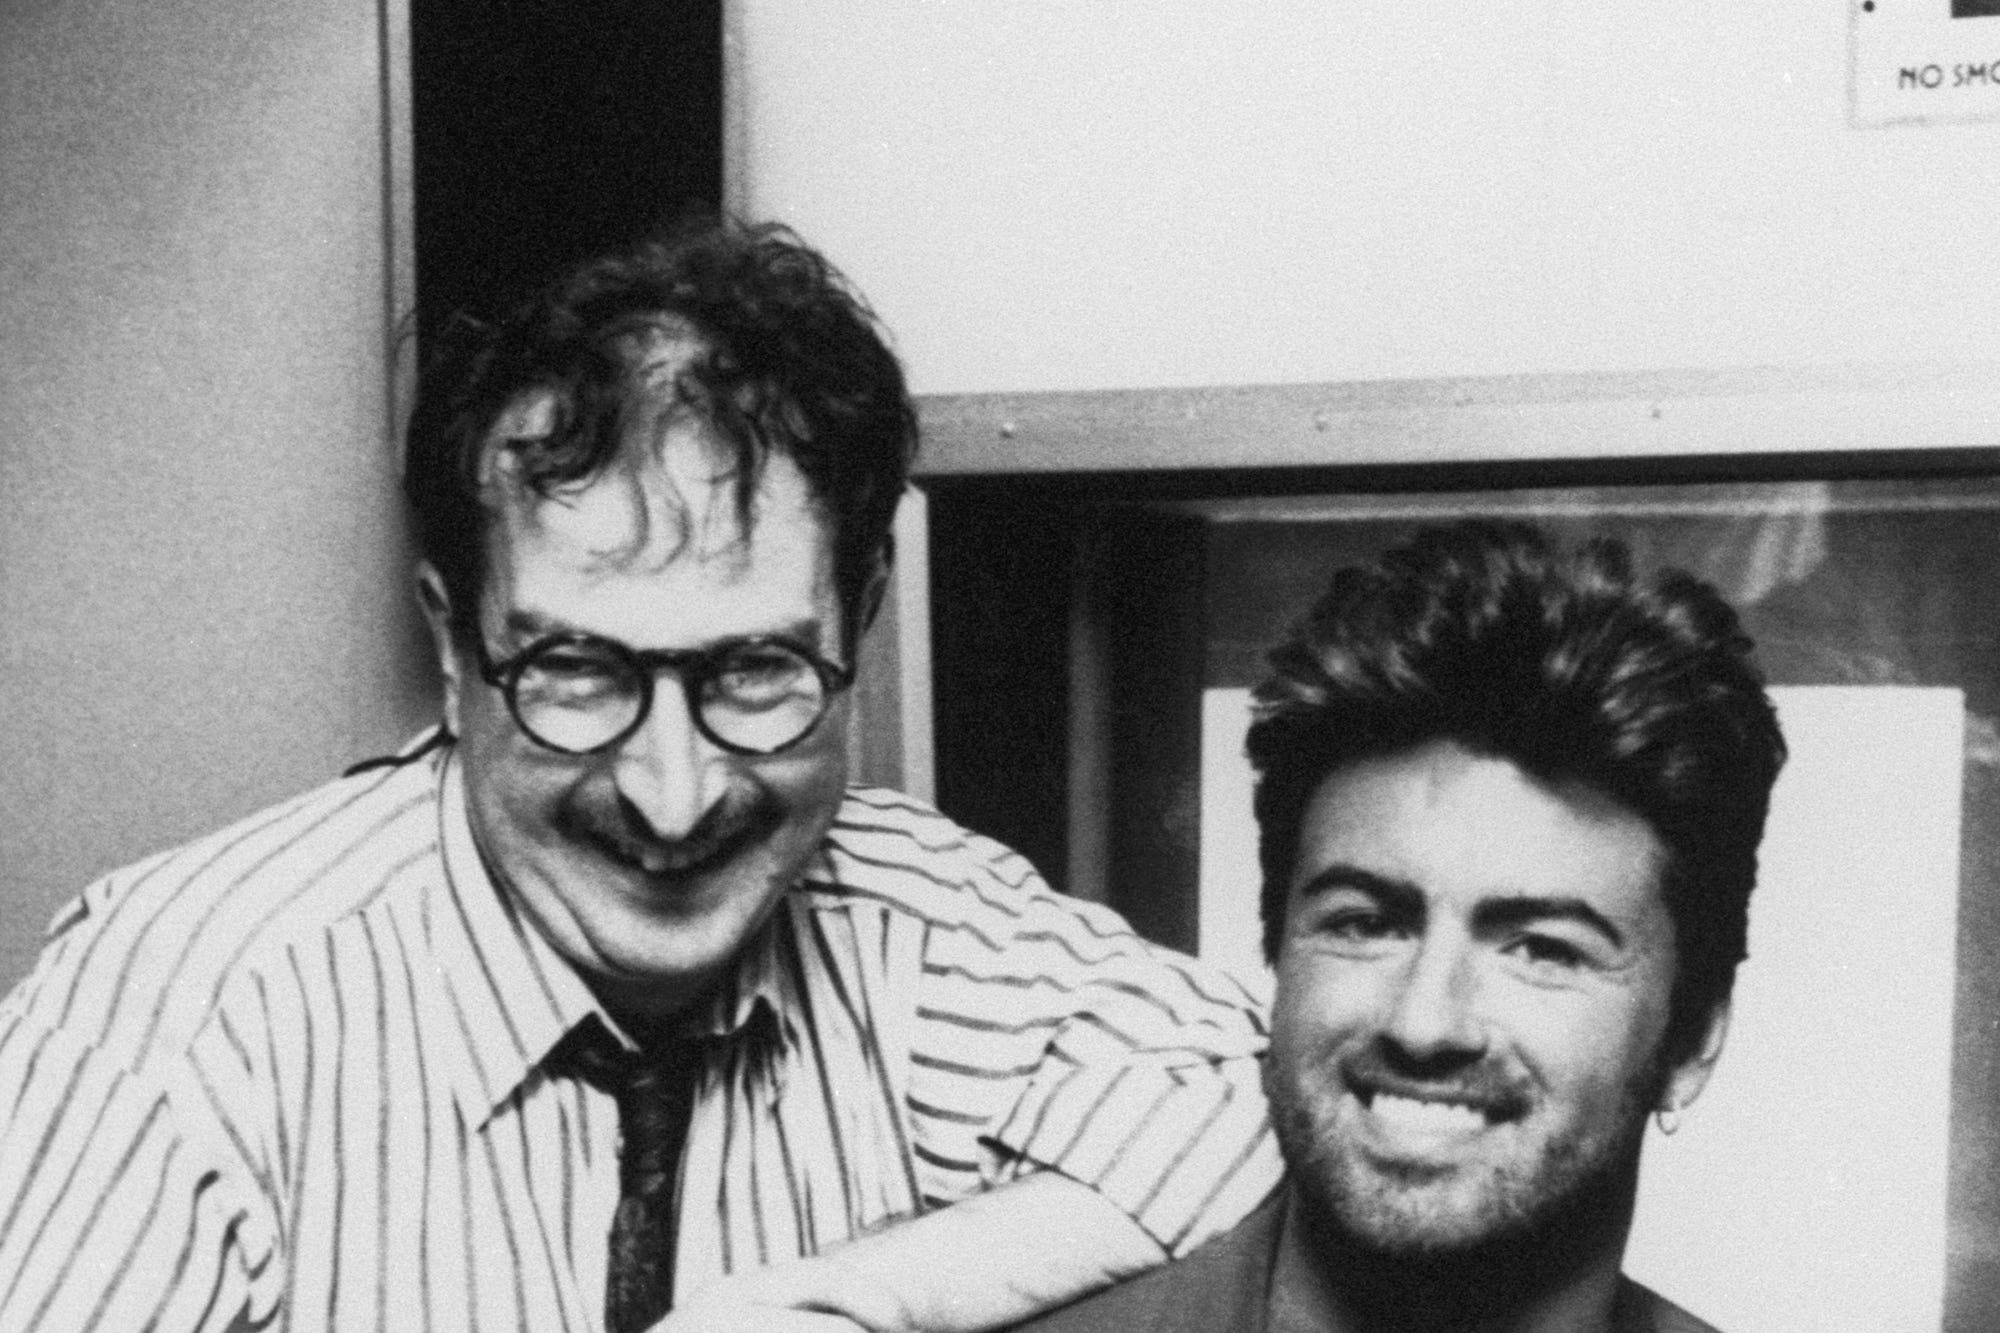 Steve Wright with George Michael of Wham!